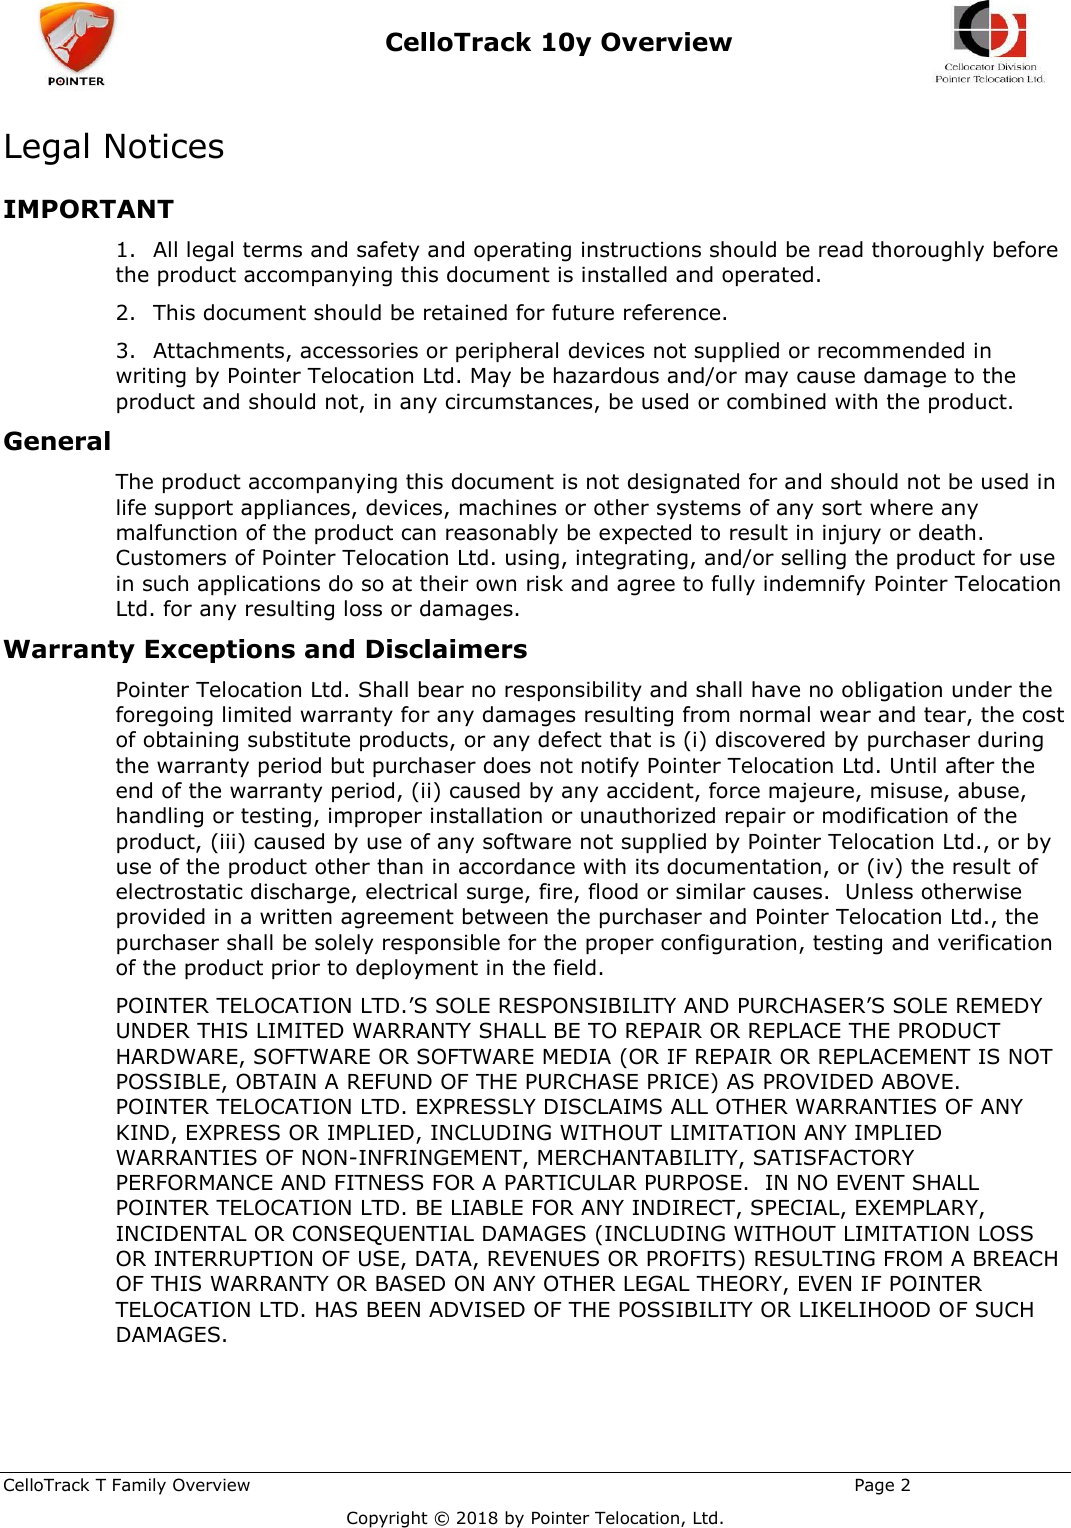  CelloTrack 10y Overview    CelloTrack T Family Overview                                                                                                       Page 2   Copyright © 2018 by Pointer Telocation, Ltd. Legal Notices  IMPORTANT 1.  All legal terms and safety and operating instructions should be read thoroughly before the product accompanying this document is installed and operated. 2.  This document should be retained for future reference. 3.  Attachments, accessories or peripheral devices not supplied or recommended in writing by Pointer Telocation Ltd. May be hazardous and/or may cause damage to the product and should not, in any circumstances, be used or combined with the product. General  The product accompanying this document is not designated for and should not be used in life support appliances, devices, machines or other systems of any sort where any malfunction of the product can reasonably be expected to result in injury or death.  Customers of Pointer Telocation Ltd. using, integrating, and/or selling the product for use in such applications do so at their own risk and agree to fully indemnify Pointer Telocation Ltd. for any resulting loss or damages.  Warranty Exceptions and Disclaimers Pointer Telocation Ltd. Shall bear no responsibility and shall have no obligation under the foregoing limited warranty for any damages resulting from normal wear and tear, the cost of obtaining substitute products, or any defect that is (i) discovered by purchaser during the warranty period but purchaser does not notify Pointer Telocation Ltd. Until after the end of the warranty period, (ii) caused by any accident, force majeure, misuse, abuse, handling or testing, improper installation or unauthorized repair or modification of the product, (iii) caused by use of any software not supplied by Pointer Telocation Ltd., or by use of the product other than in accordance with its documentation, or (iv) the result of electrostatic discharge, electrical surge, fire, flood or similar causes.  Unless otherwise provided in a written agreement between the purchaser and Pointer Telocation Ltd., the purchaser shall be solely responsible for the proper configuration, testing and verification of the product prior to deployment in the field. POINTER TELOCATION LTD.’S SOLE RESPONSIBILITY AND PURCHASER’S SOLE REMEDY UNDER THIS LIMITED WARRANTY SHALL BE TO REPAIR OR REPLACE THE PRODUCT HARDWARE, SOFTWARE OR SOFTWARE MEDIA (OR IF REPAIR OR REPLACEMENT IS NOT POSSIBLE, OBTAIN A REFUND OF THE PURCHASE PRICE) AS PROVIDED ABOVE.  POINTER TELOCATION LTD. EXPRESSLY DISCLAIMS ALL OTHER WARRANTIES OF ANY KIND, EXPRESS OR IMPLIED, INCLUDING WITHOUT LIMITATION ANY IMPLIED WARRANTIES OF NON-INFRINGEMENT, MERCHANTABILITY, SATISFACTORY PERFORMANCE AND FITNESS FOR A PARTICULAR PURPOSE.  IN NO EVENT SHALL POINTER TELOCATION LTD. BE LIABLE FOR ANY INDIRECT, SPECIAL, EXEMPLARY, INCIDENTAL OR CONSEQUENTIAL DAMAGES (INCLUDING WITHOUT LIMITATION LOSS OR INTERRUPTION OF USE, DATA, REVENUES OR PROFITS) RESULTING FROM A BREACH OF THIS WARRANTY OR BASED ON ANY OTHER LEGAL THEORY, EVEN IF POINTER TELOCATION LTD. HAS BEEN ADVISED OF THE POSSIBILITY OR LIKELIHOOD OF SUCH DAMAGES.  